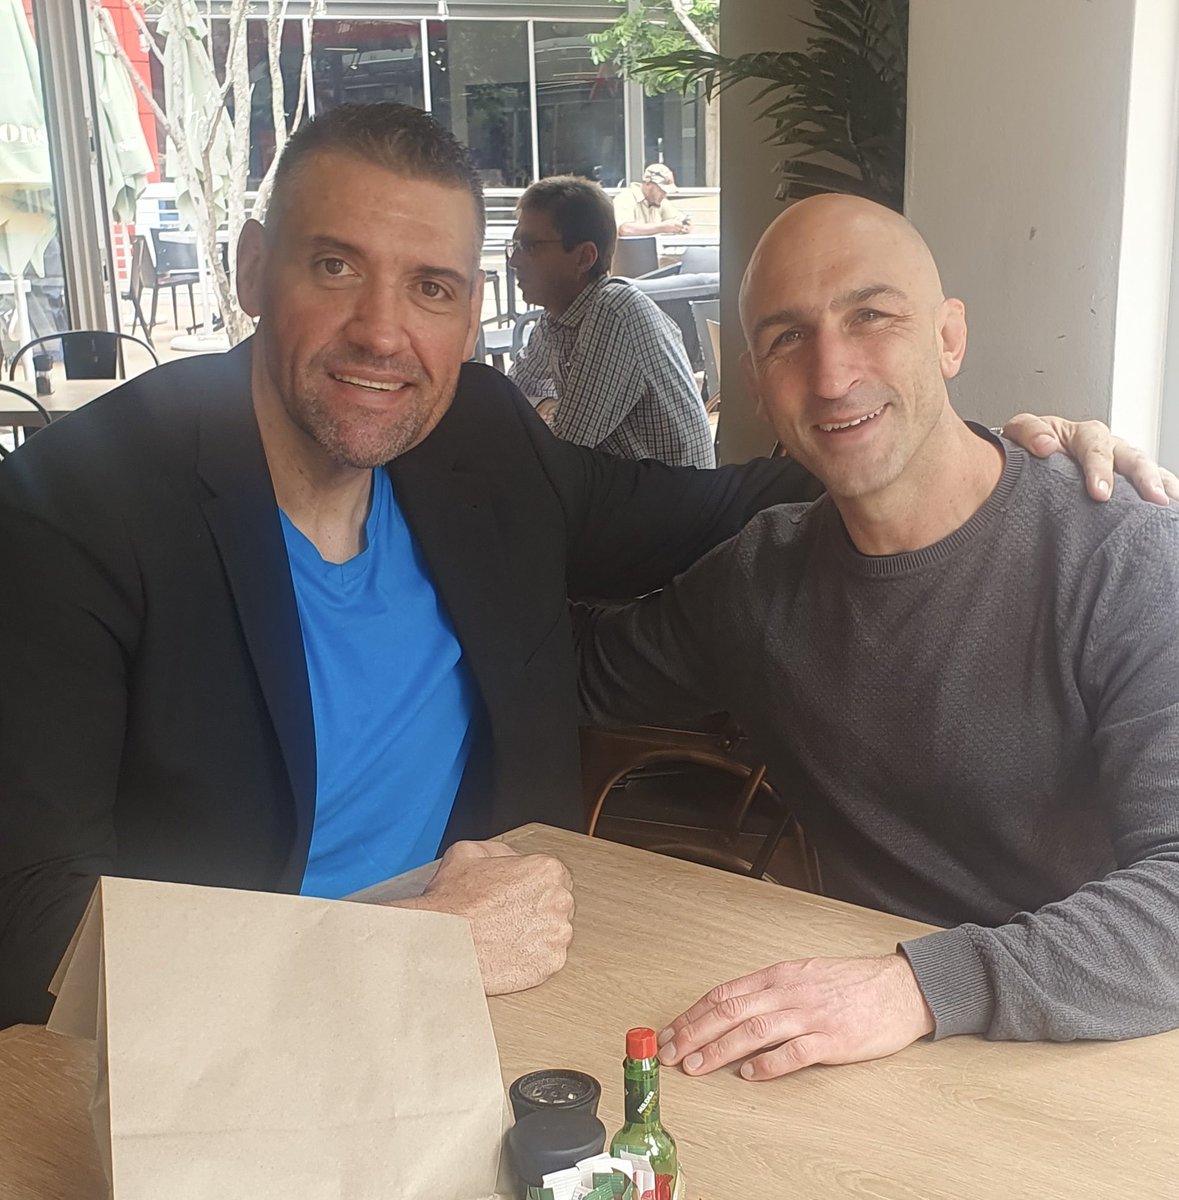 Love this ☺️

@KiebieSmith recently became the first South African player to publicly reveal his diagnosis of early onset dementia & probable CTE.

Progressive Rugby’s Ben Pegna happened to be going to 🇿🇦 and made time to catch up with Kiebie over breakfast 🍳🥓

#cultureofcare